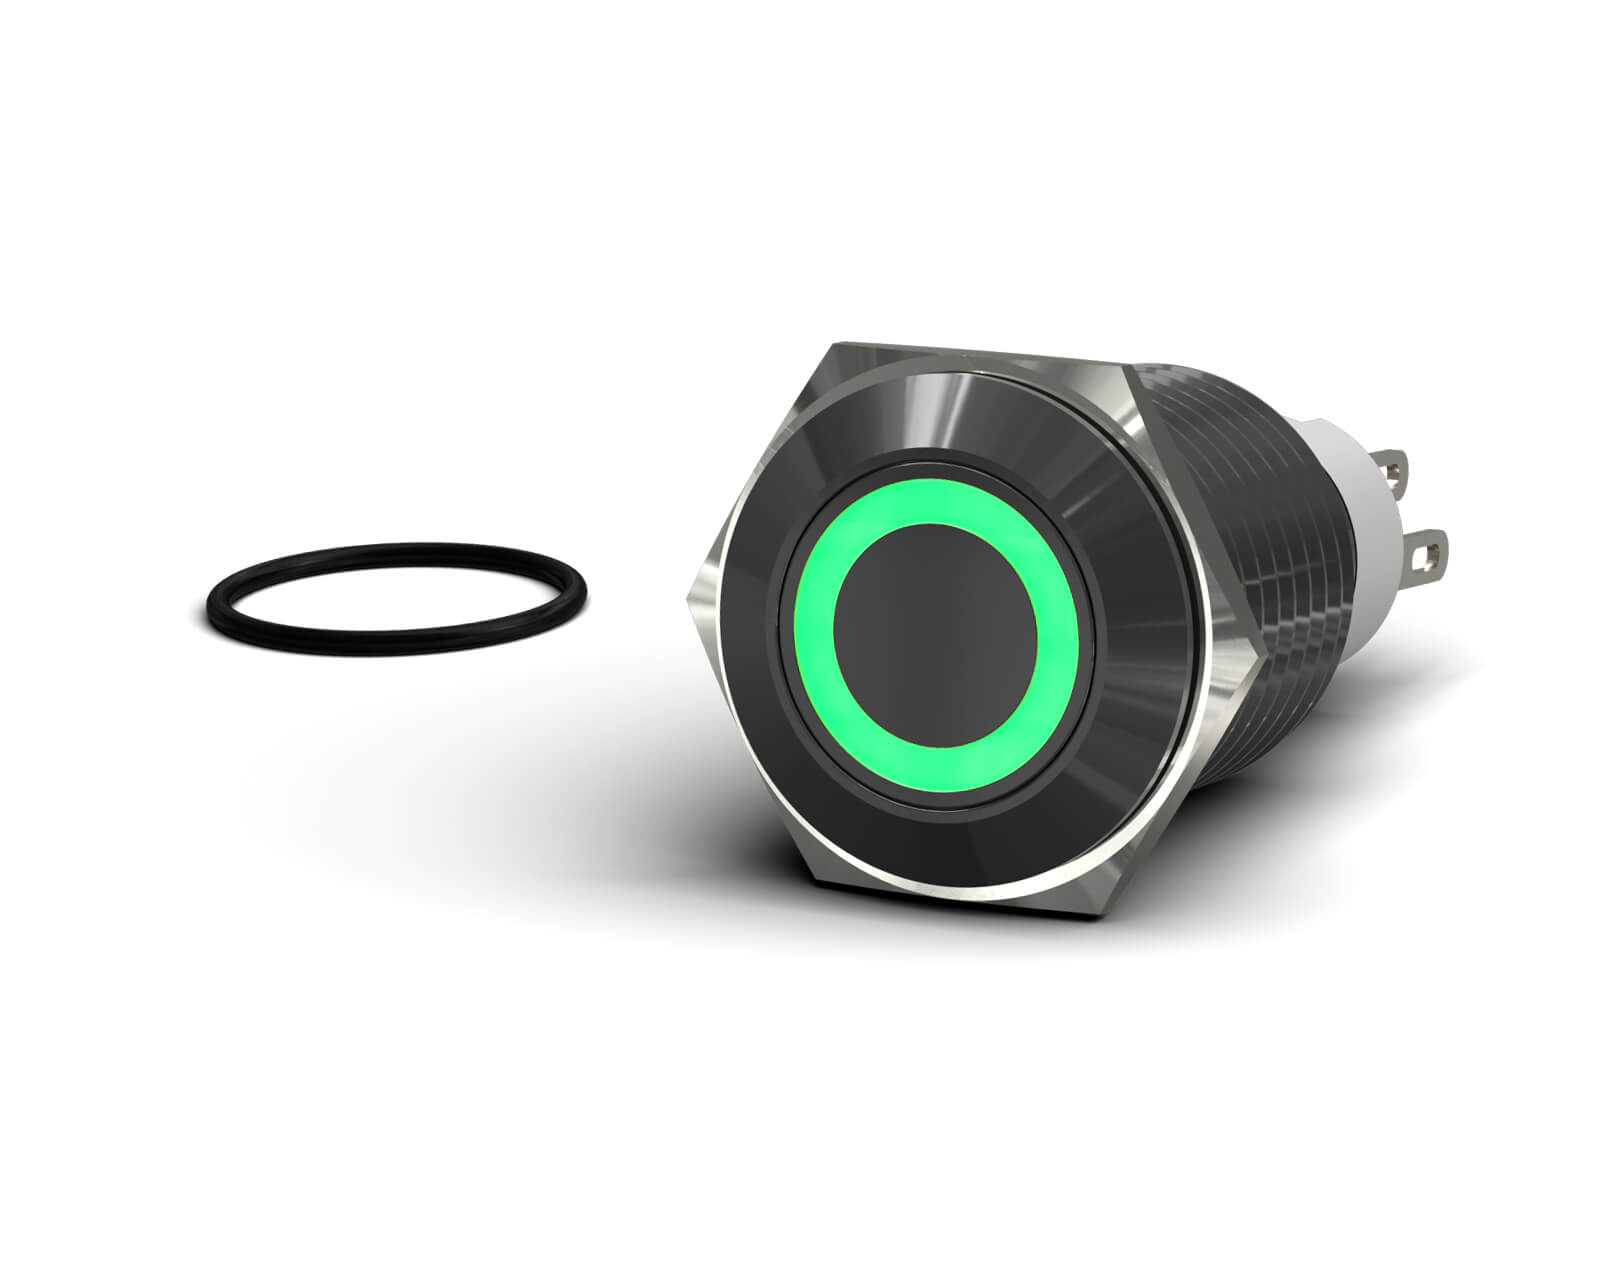 PrimoChill Black Aluminum Momentary Vandal Resistant Switch - 16mm - PrimoChill - KEEPING IT COOL Green LED Ring